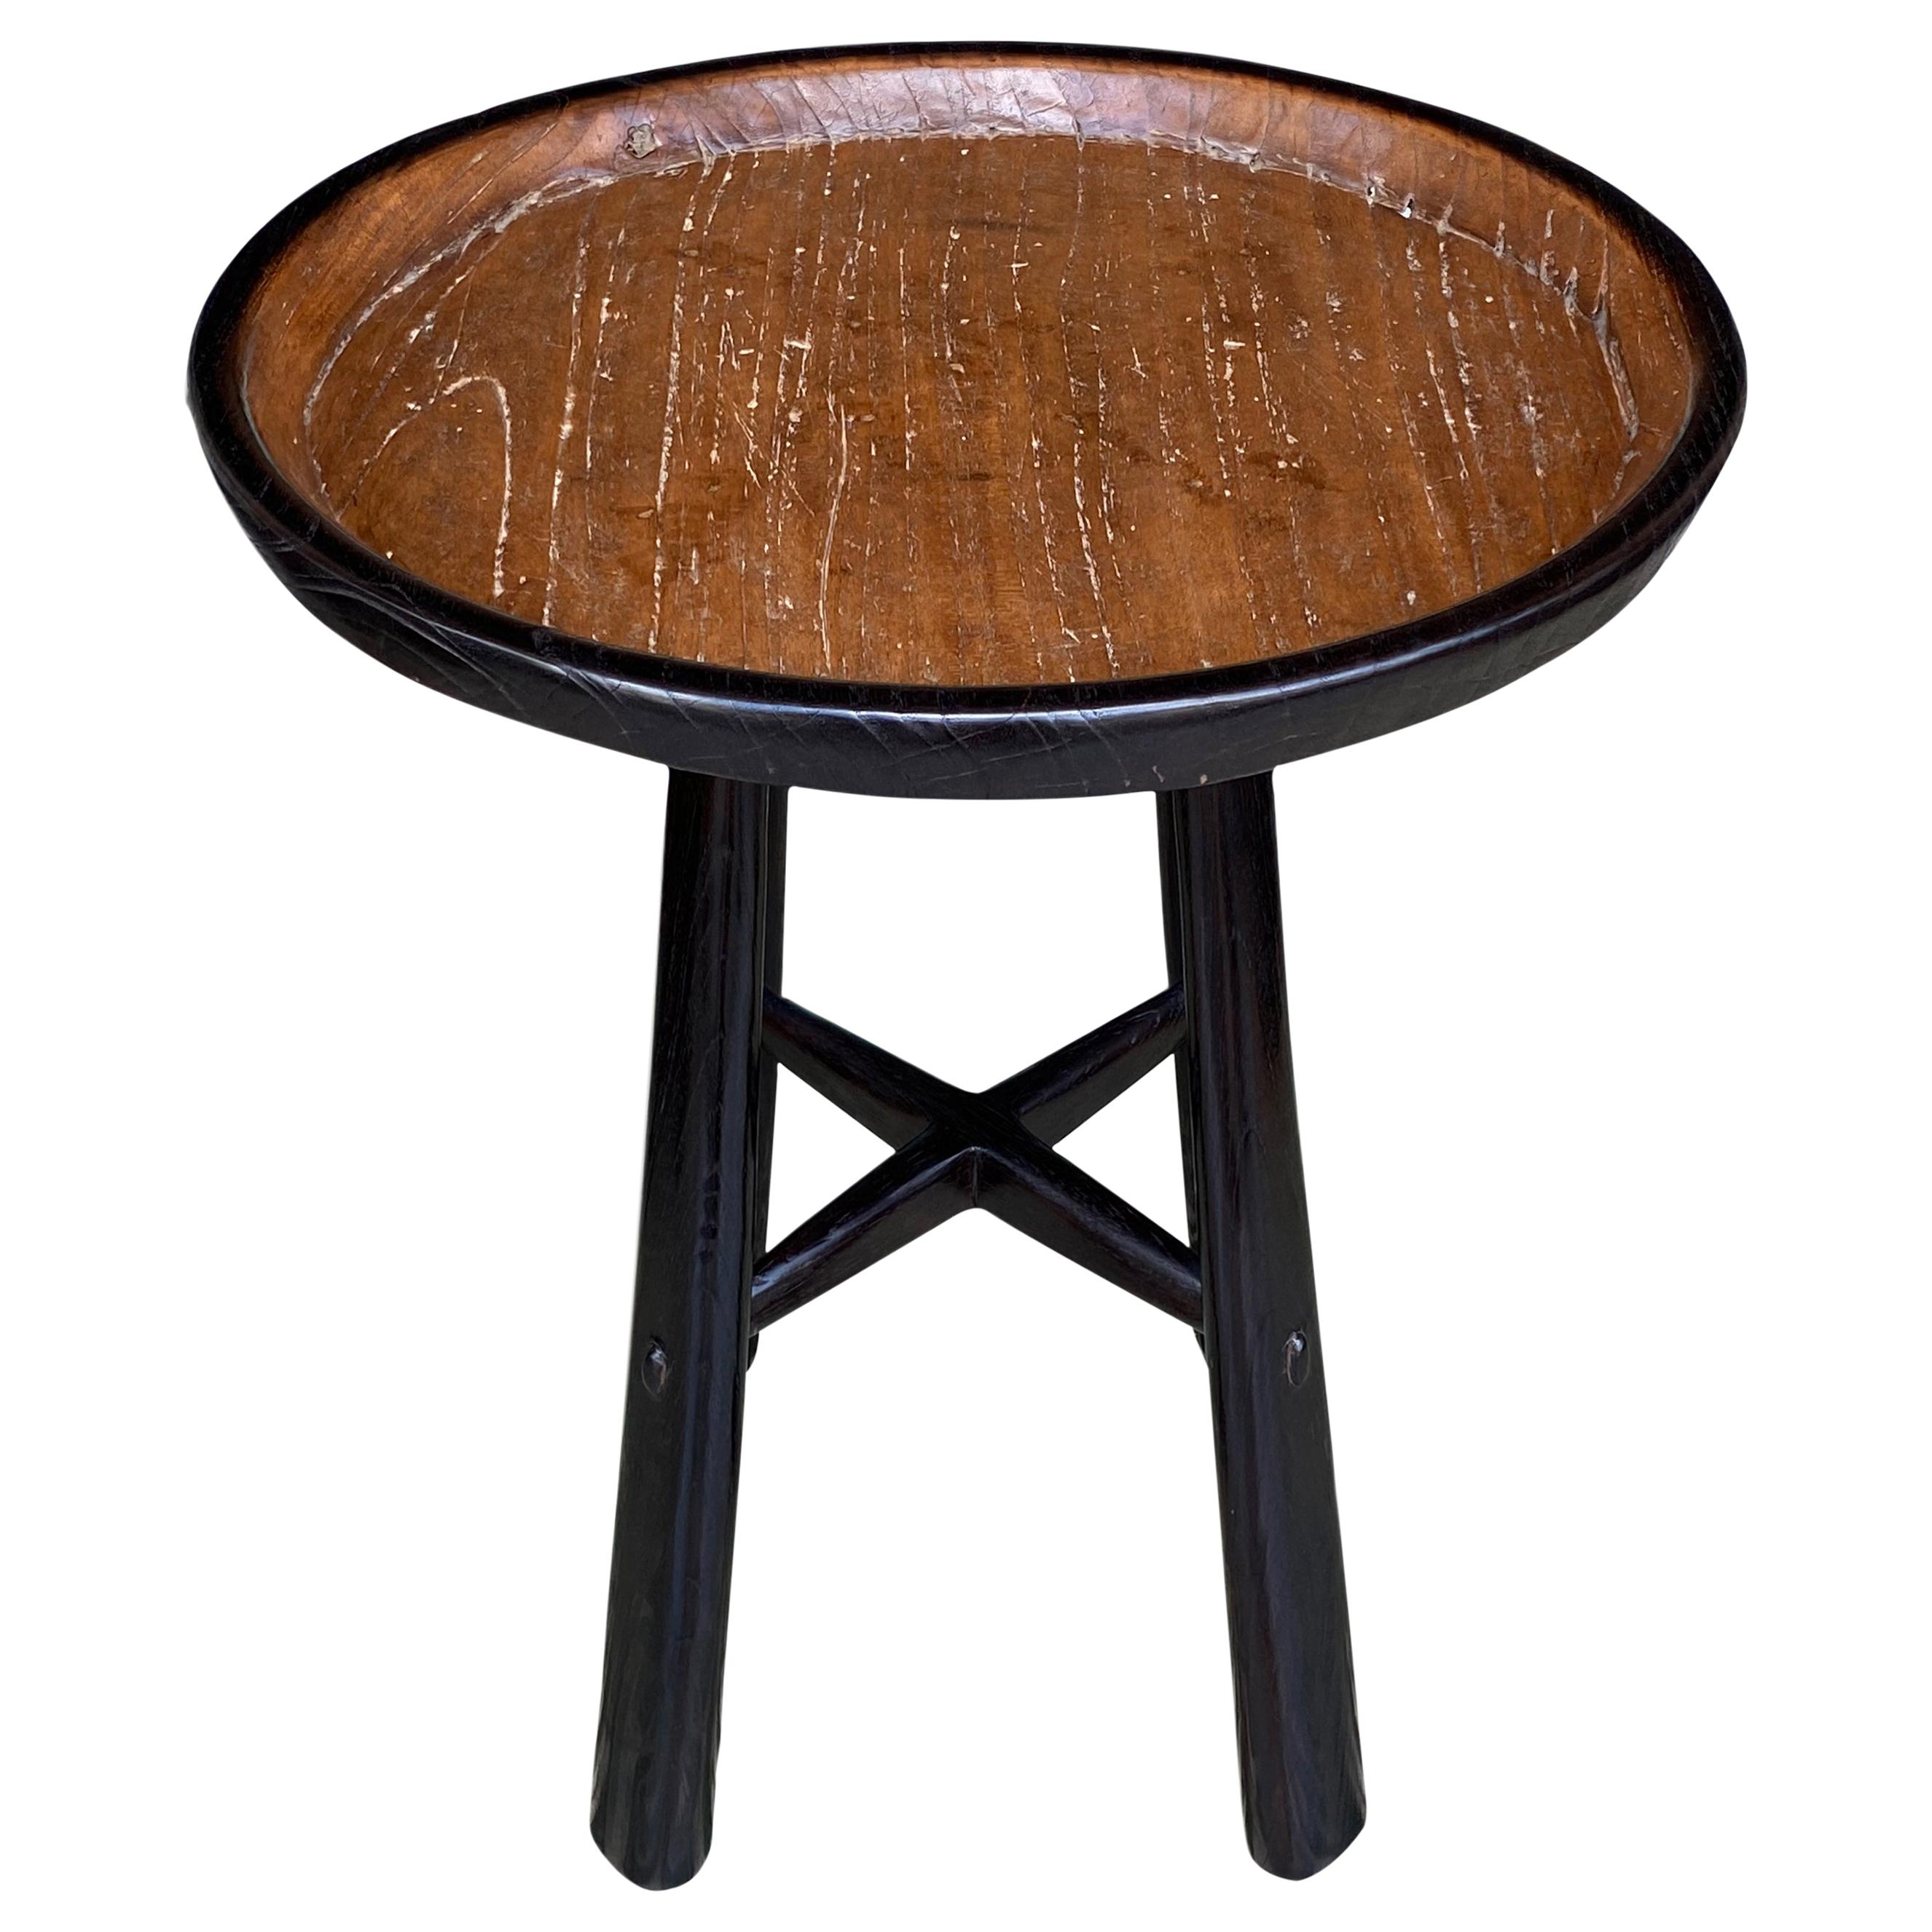 Andrianna Shamaris Midcentury Couture Antique Teak Wood Tray Side Table For Sale